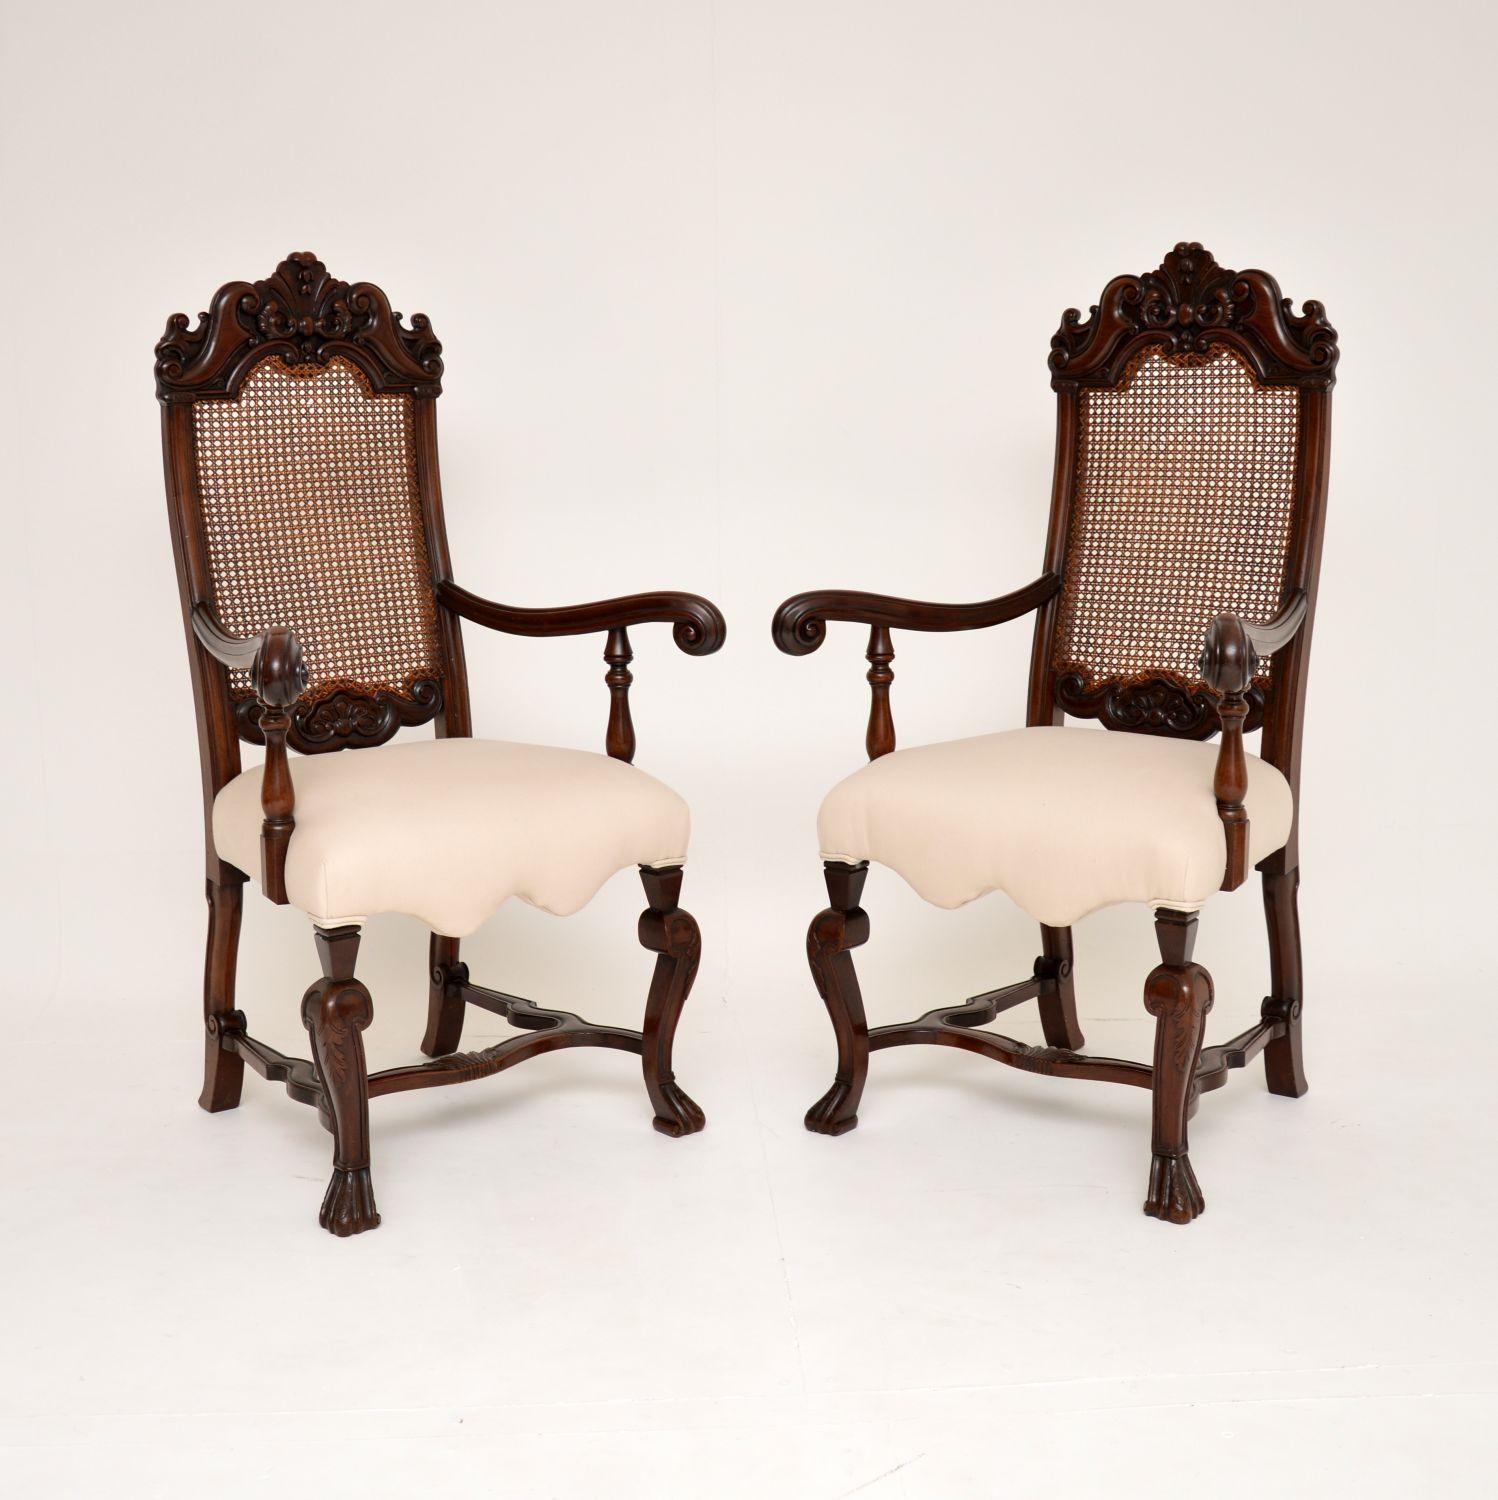 A superb pair of antique Carolean Style carved walnut armchairs with cane backs. These were made in England, they date from around the 1880-1900 period.

The quality is absolutely amazing, with fine carving throughout. They have high caned backs,